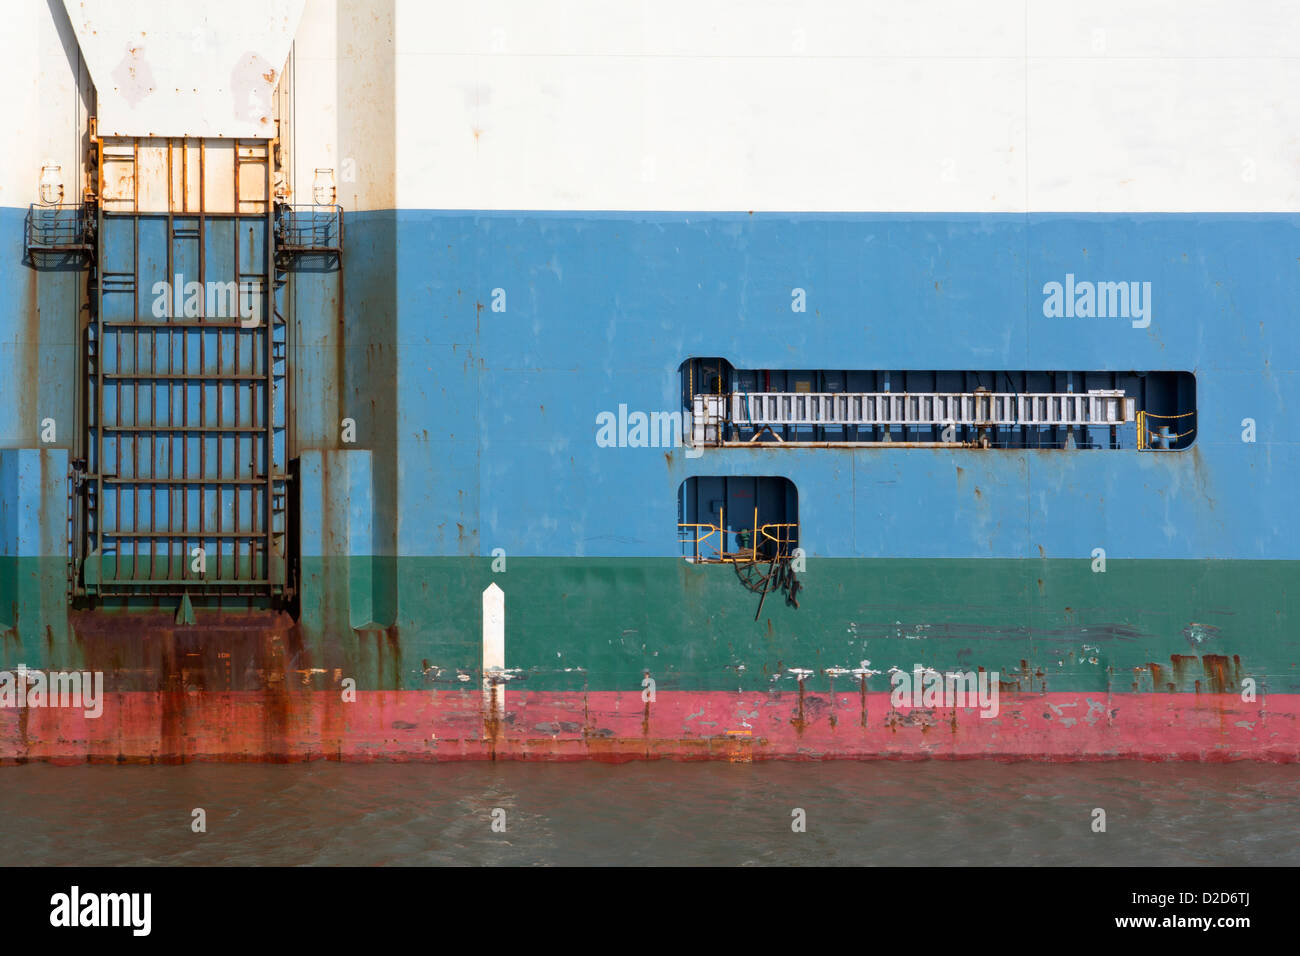 Depth marker on the hull of ship Stock Photo - Alamy